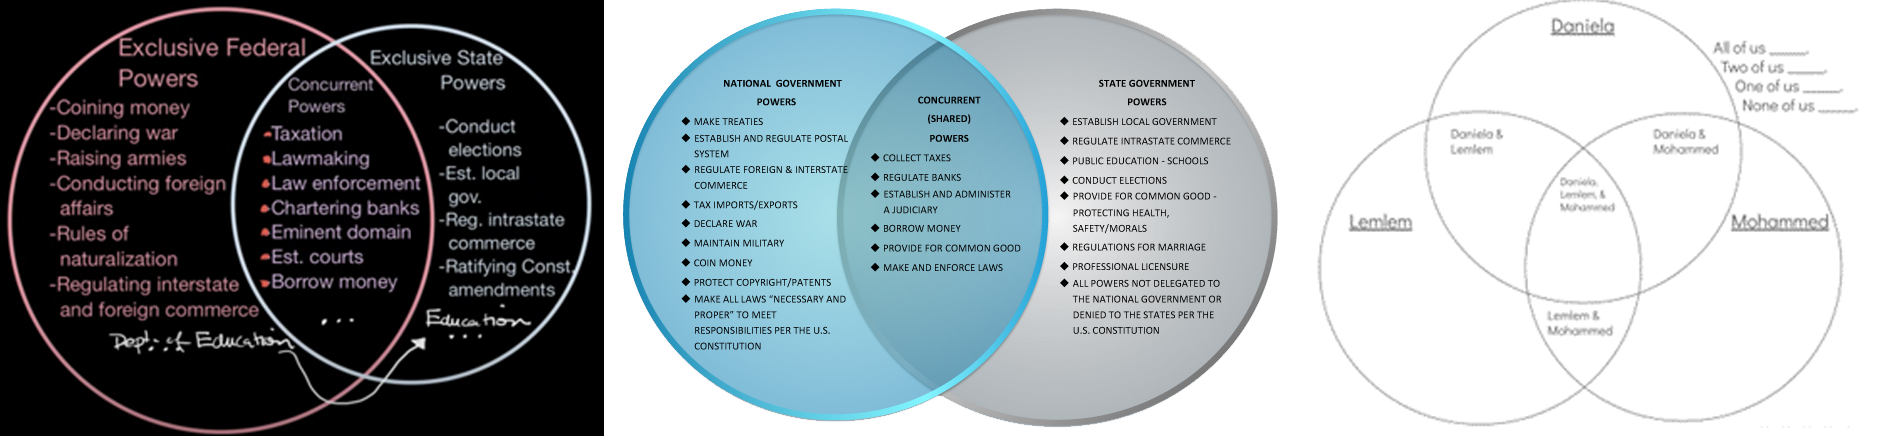 3 examples of Venn diagrams: Exclusive Federal Powers vs Exclusive State Powers, National Government Powers vs. State Government Powers, 3 students comparing all, two, one, and none